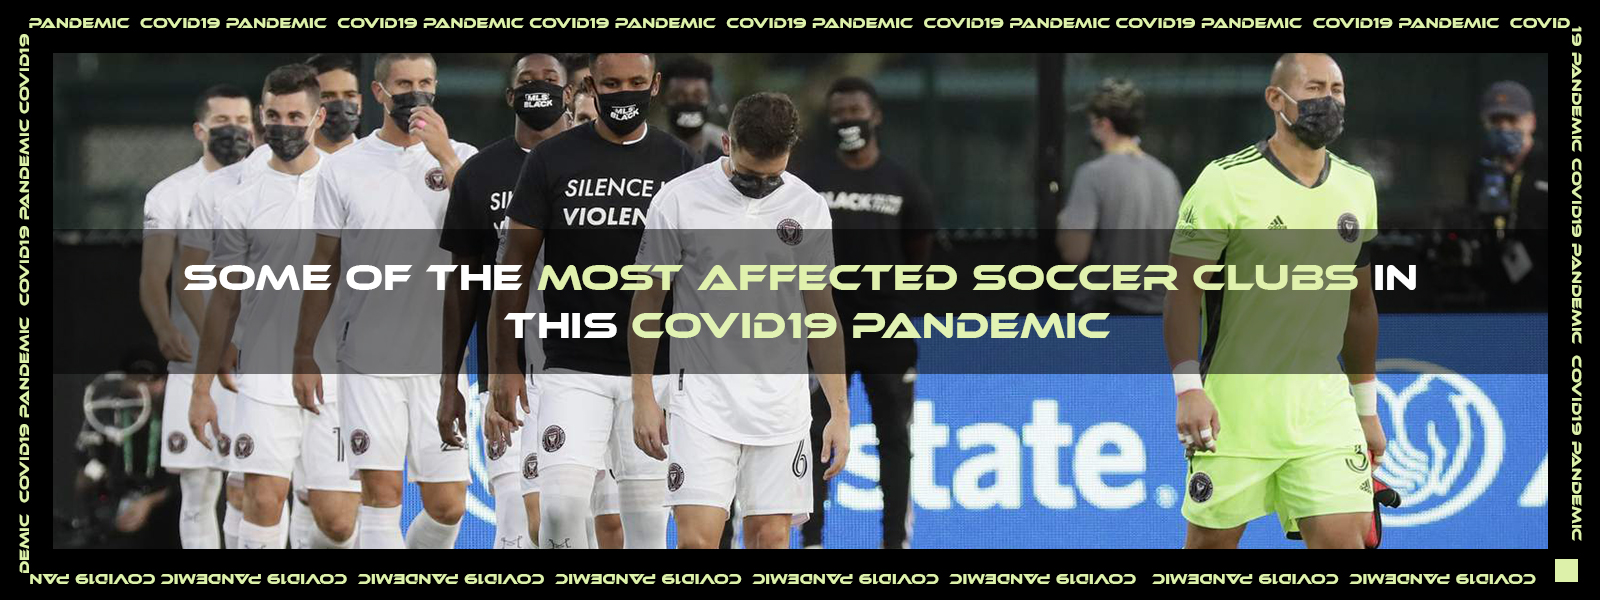 Some Of The Most Affected Football Clubs In This Covid-19 Pandemic